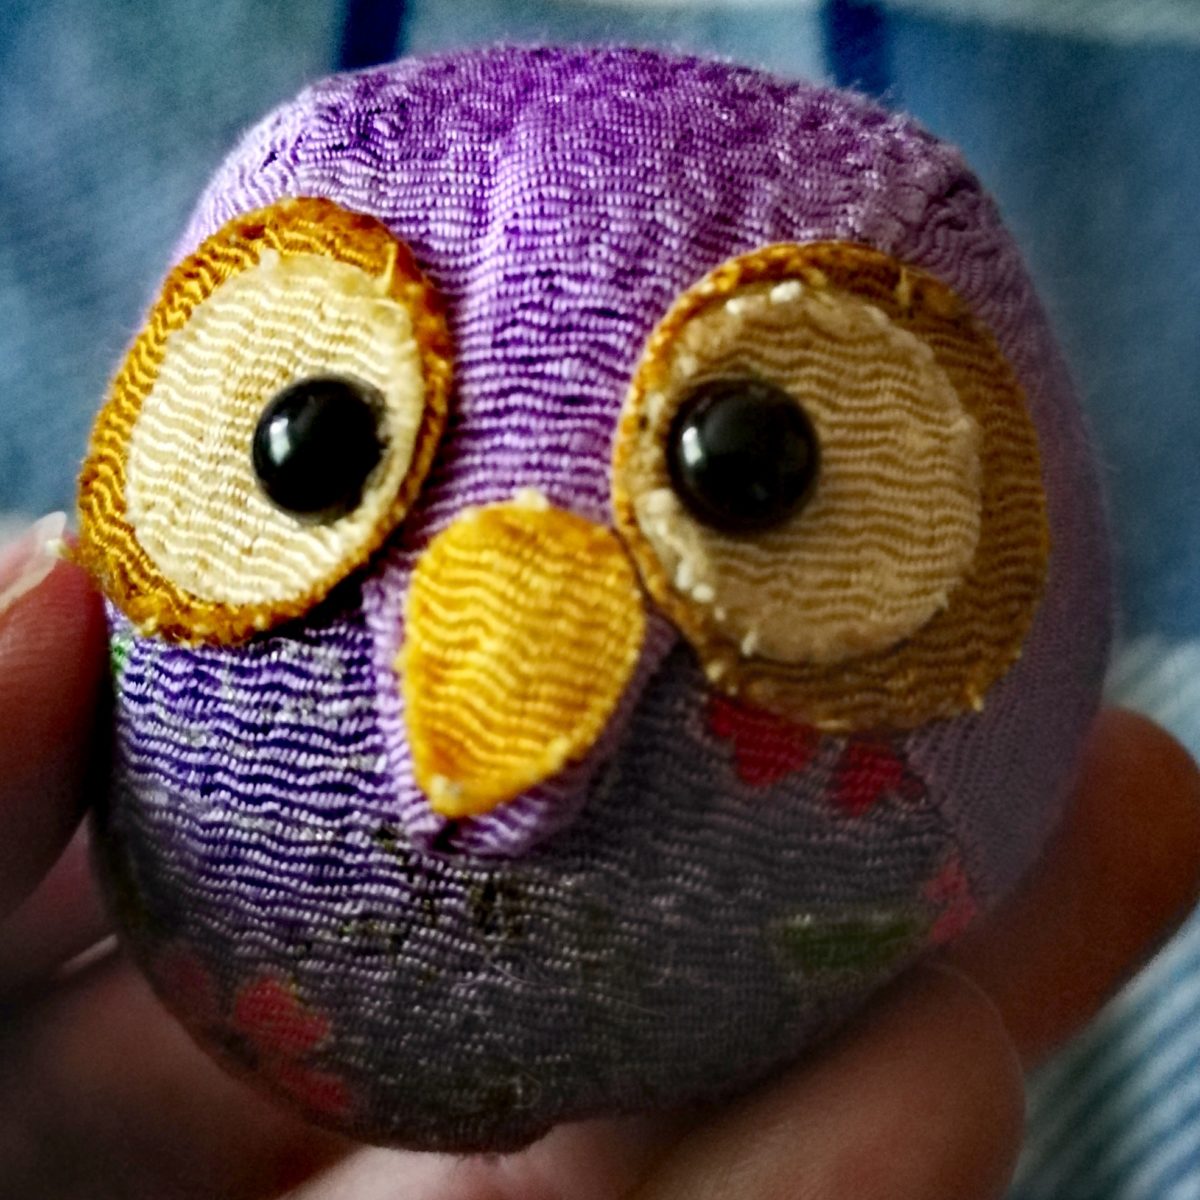 A little purple owl toy that is mostly round and sits nicely in the palm of your hand. Its bulk is made in a plain lilac purple, with a section of fabric formed into a triangular point that makes the owls face and feet. Little Owls belly is marked by another piece of fabric that has a slightly darker background, and is covered in silver swirls and pink and white and red cherry blossoms. The owl's face is finished with fabric that has been glued on rather than sewn on. Its eyes are made from concentric circles of brown, with small, lighter pieces off centre for the larger circles. The smaller dark pieces give the eyes a new moon sort of look. The pupils are black matte plastic and look straight ahead. The beak is marked by a piece of orange yellow fabric. It is held in the left hand of a white woman. The background is a white and blue plaid fleece blanket.